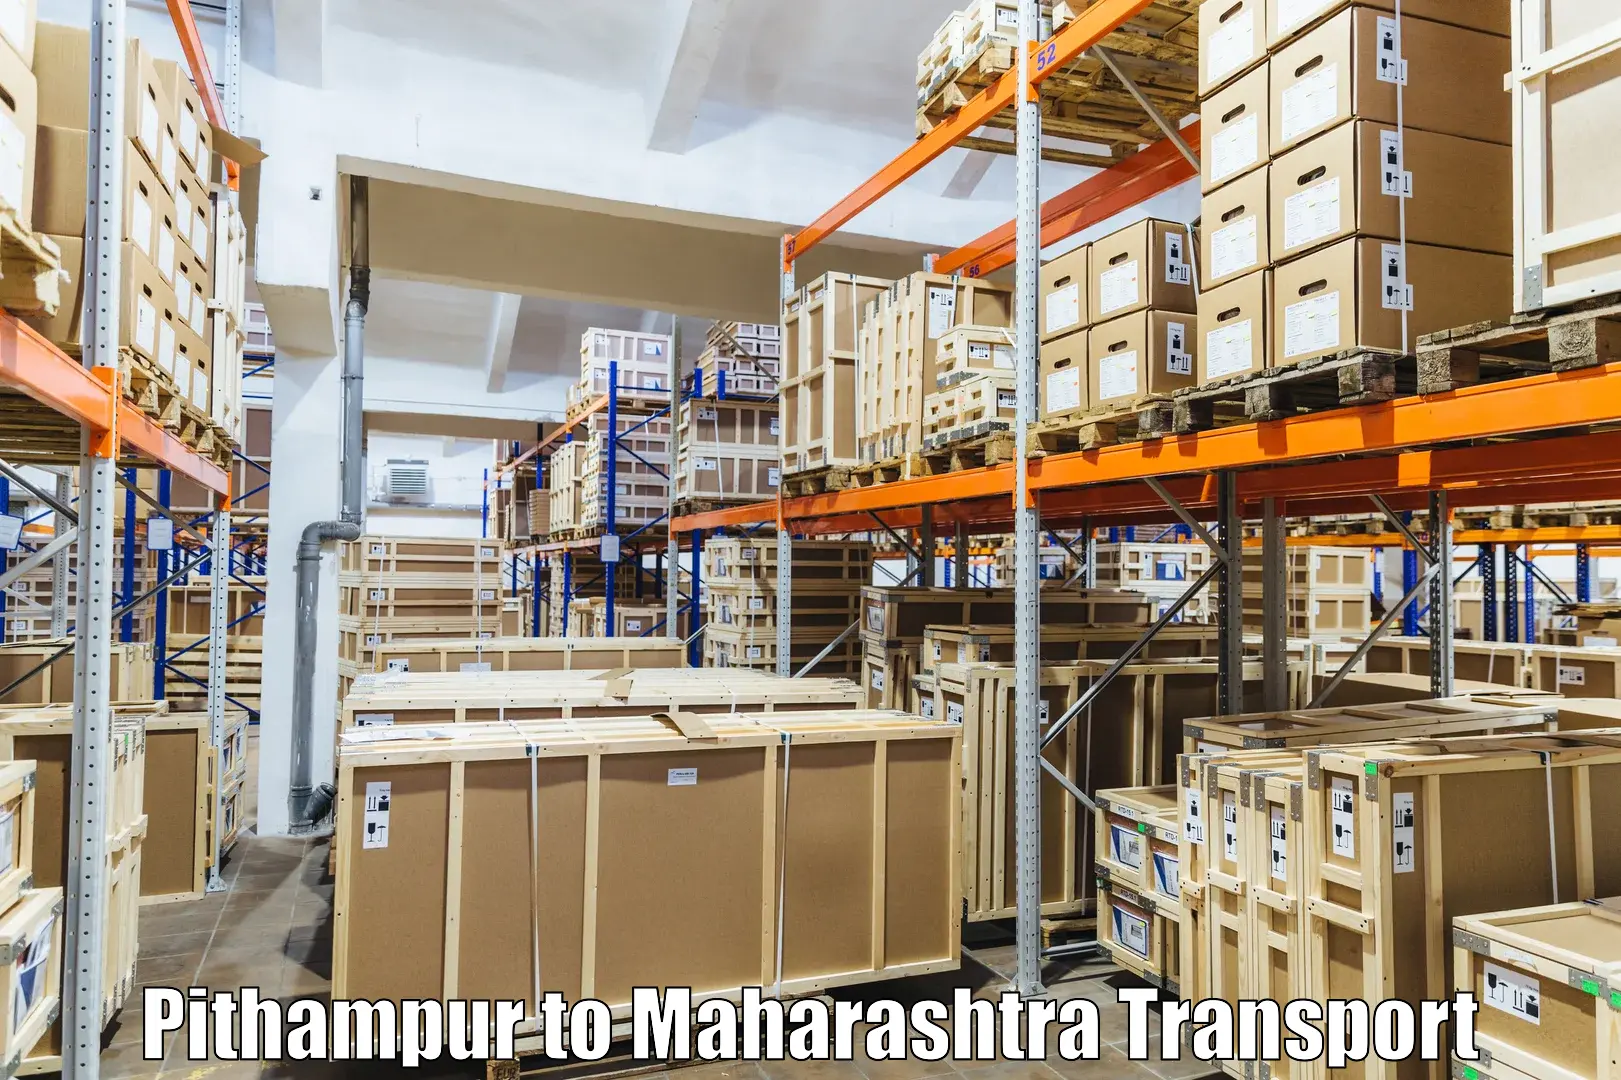 Daily parcel service transport Pithampur to Chinchbunder